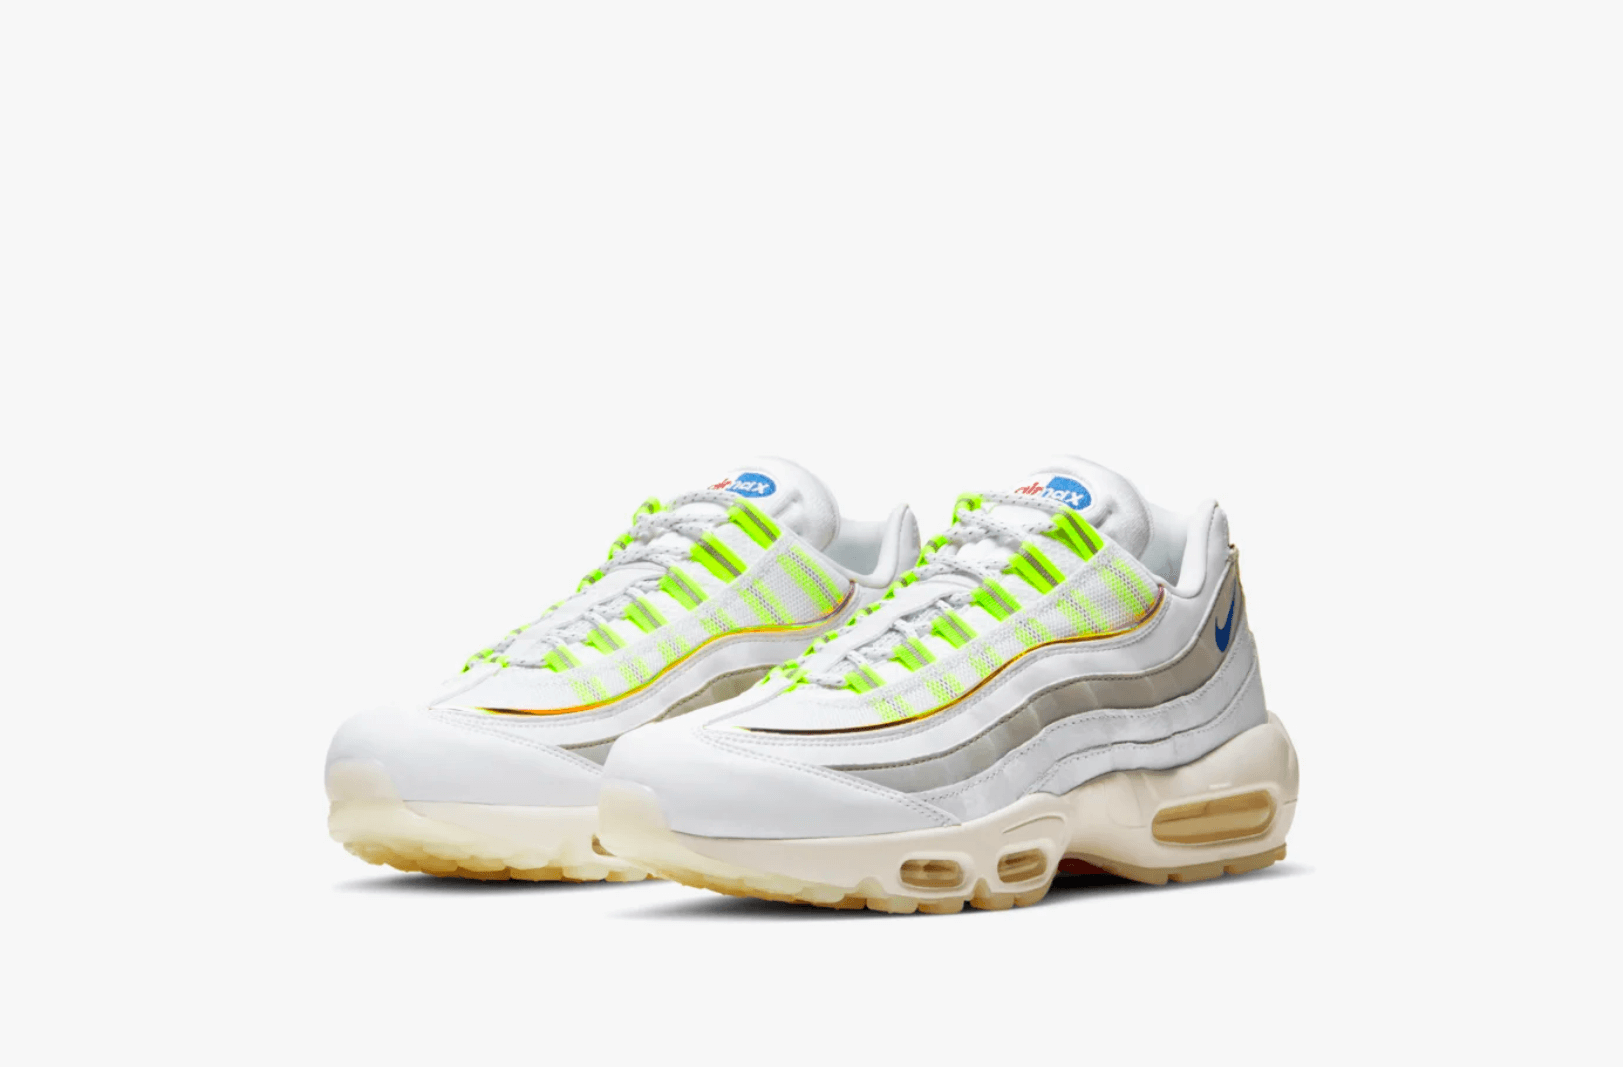 The 'De Lo Mio' Max 95 Is Ode To Dominican